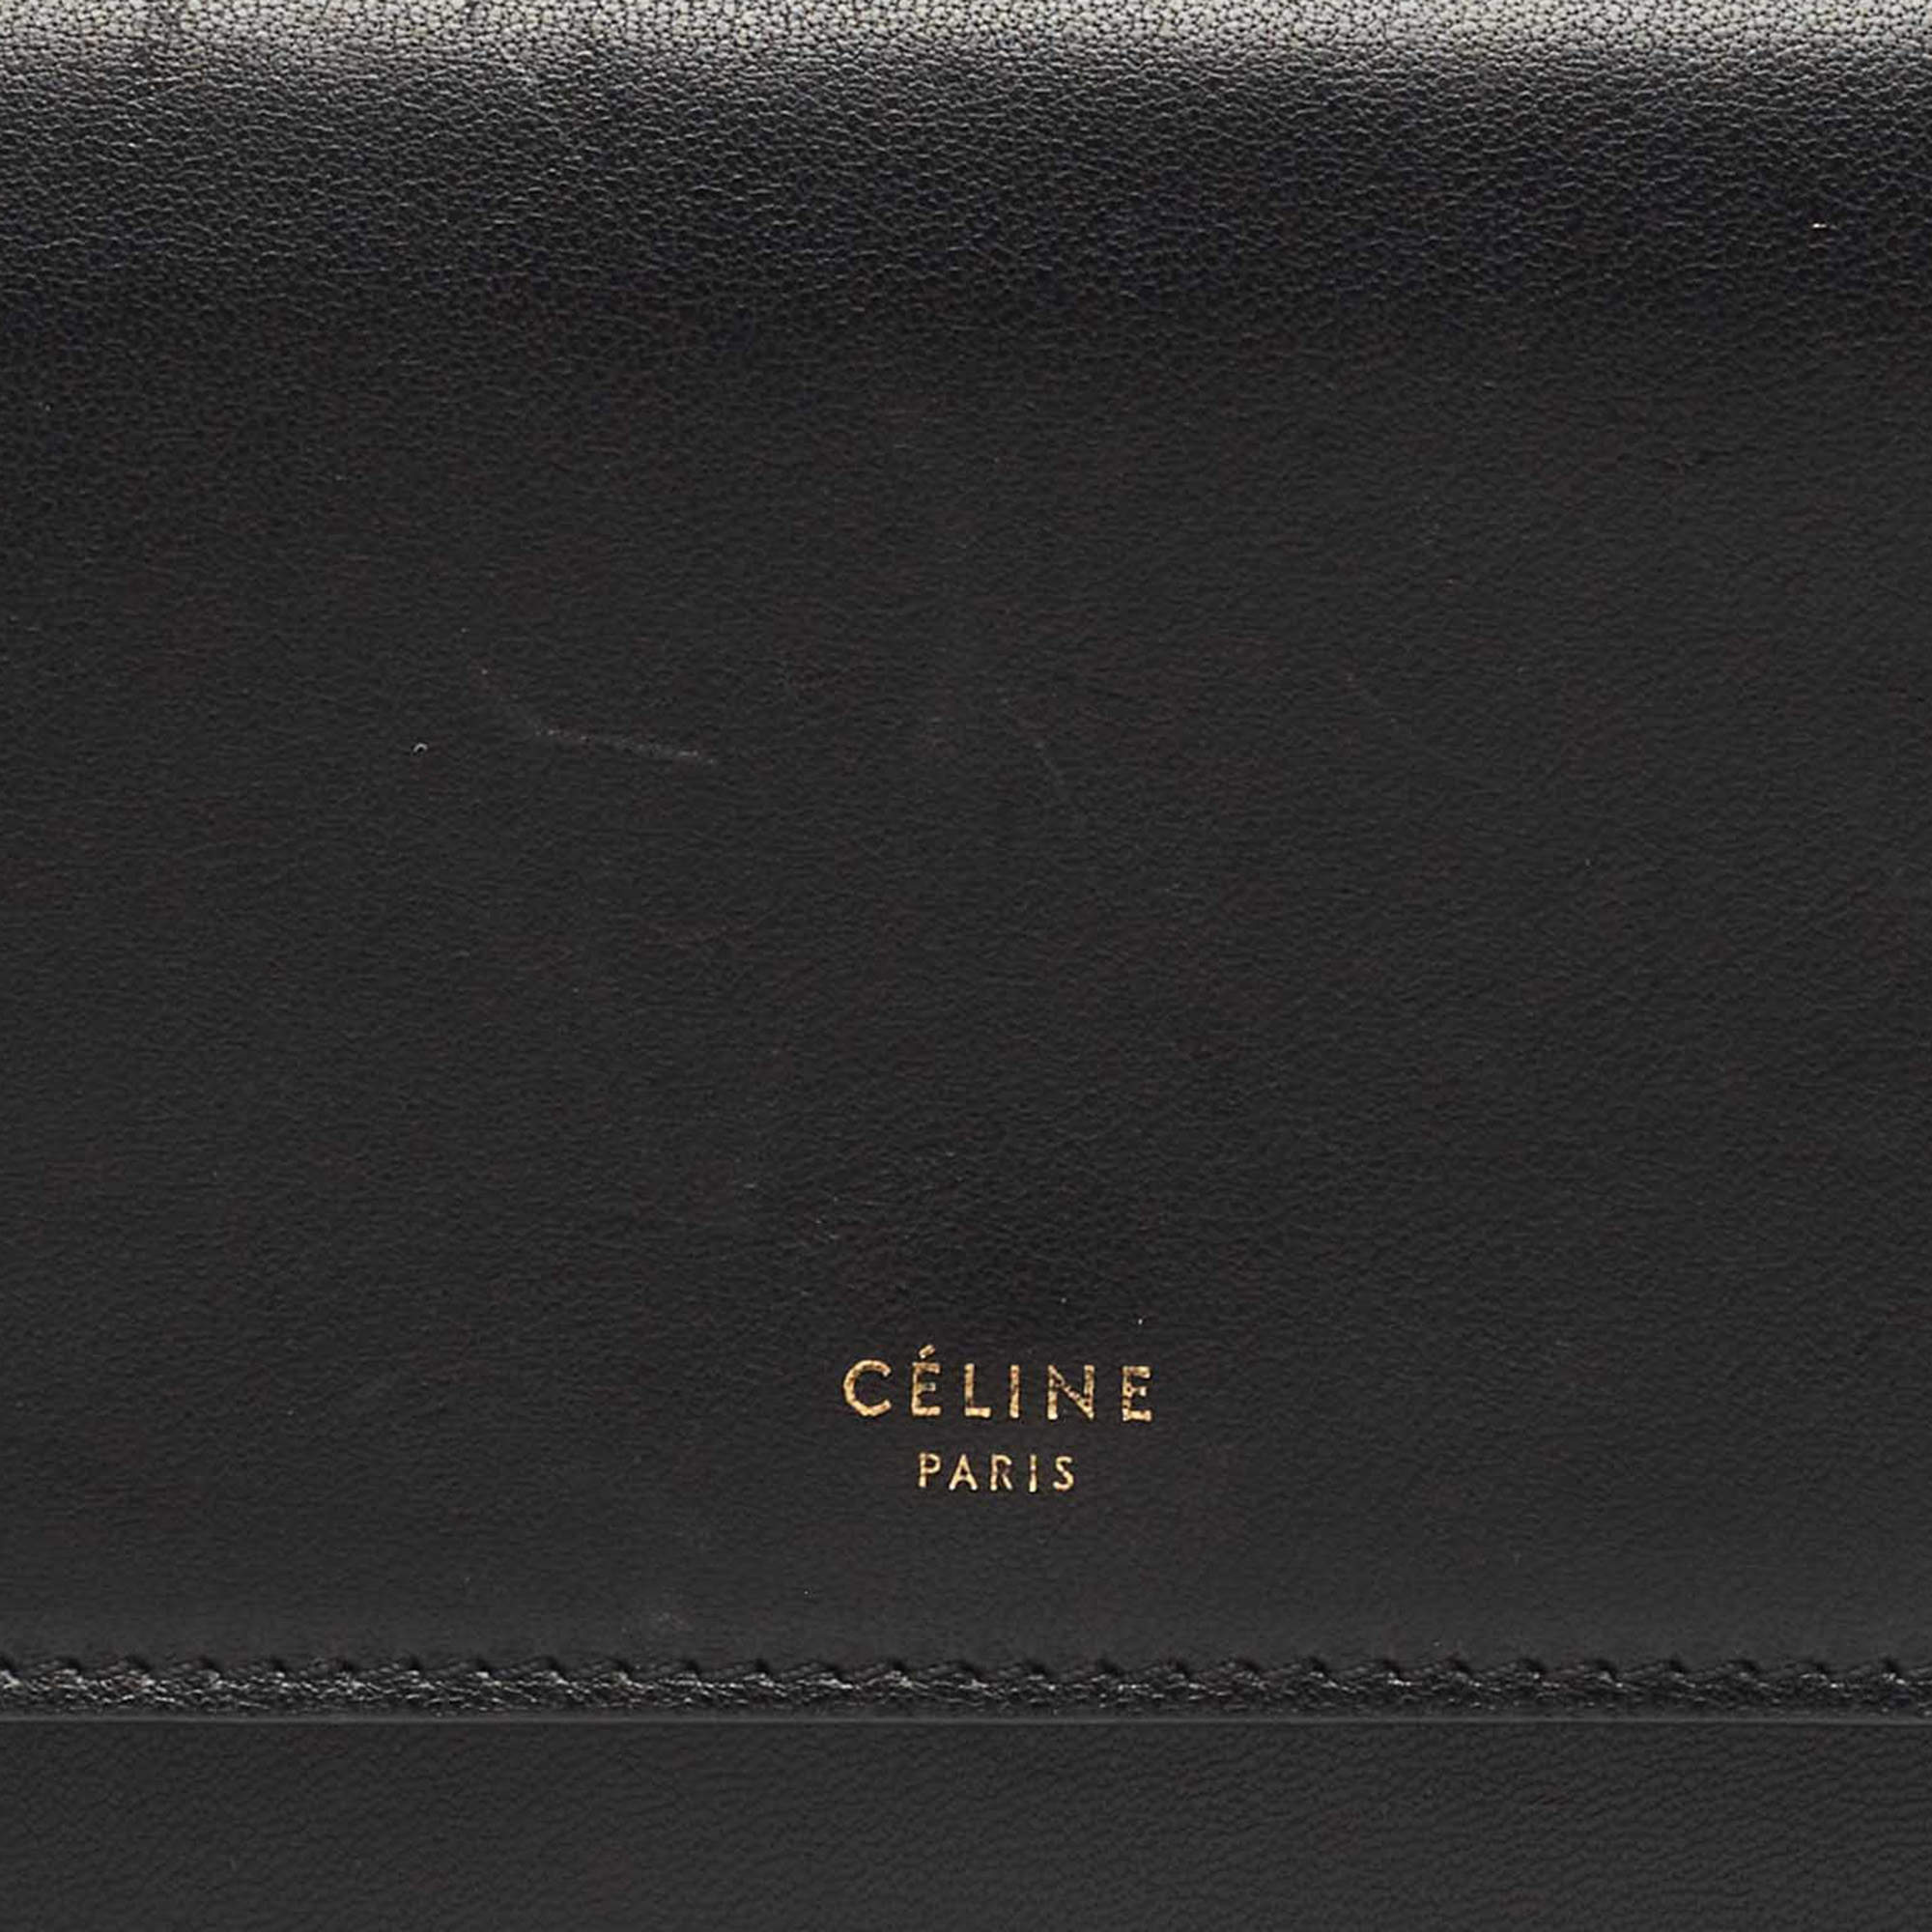 Celine Grey Grained Leather Small Trifold Wallet Celine